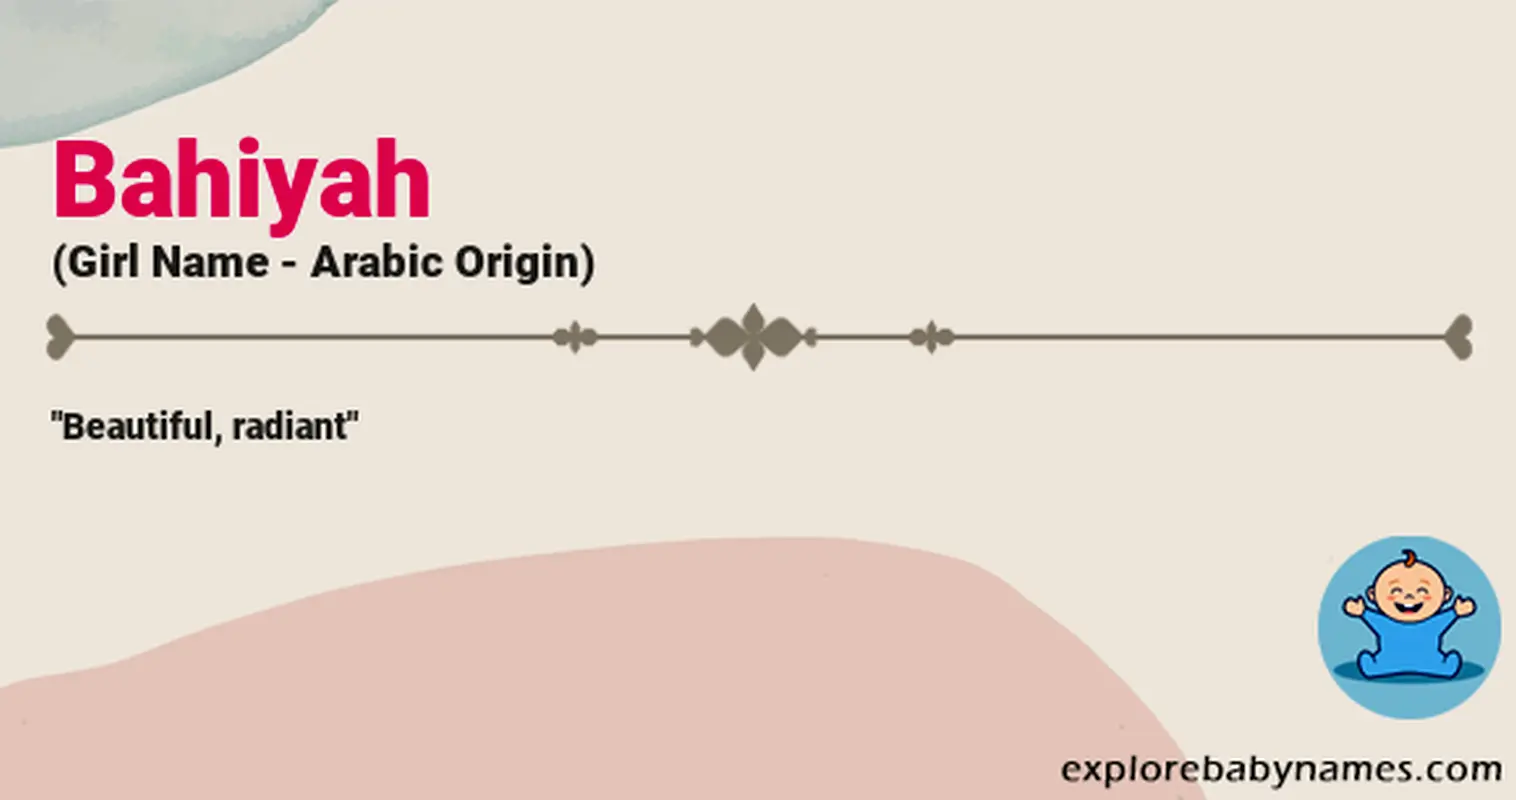 Meaning of Bahiyah